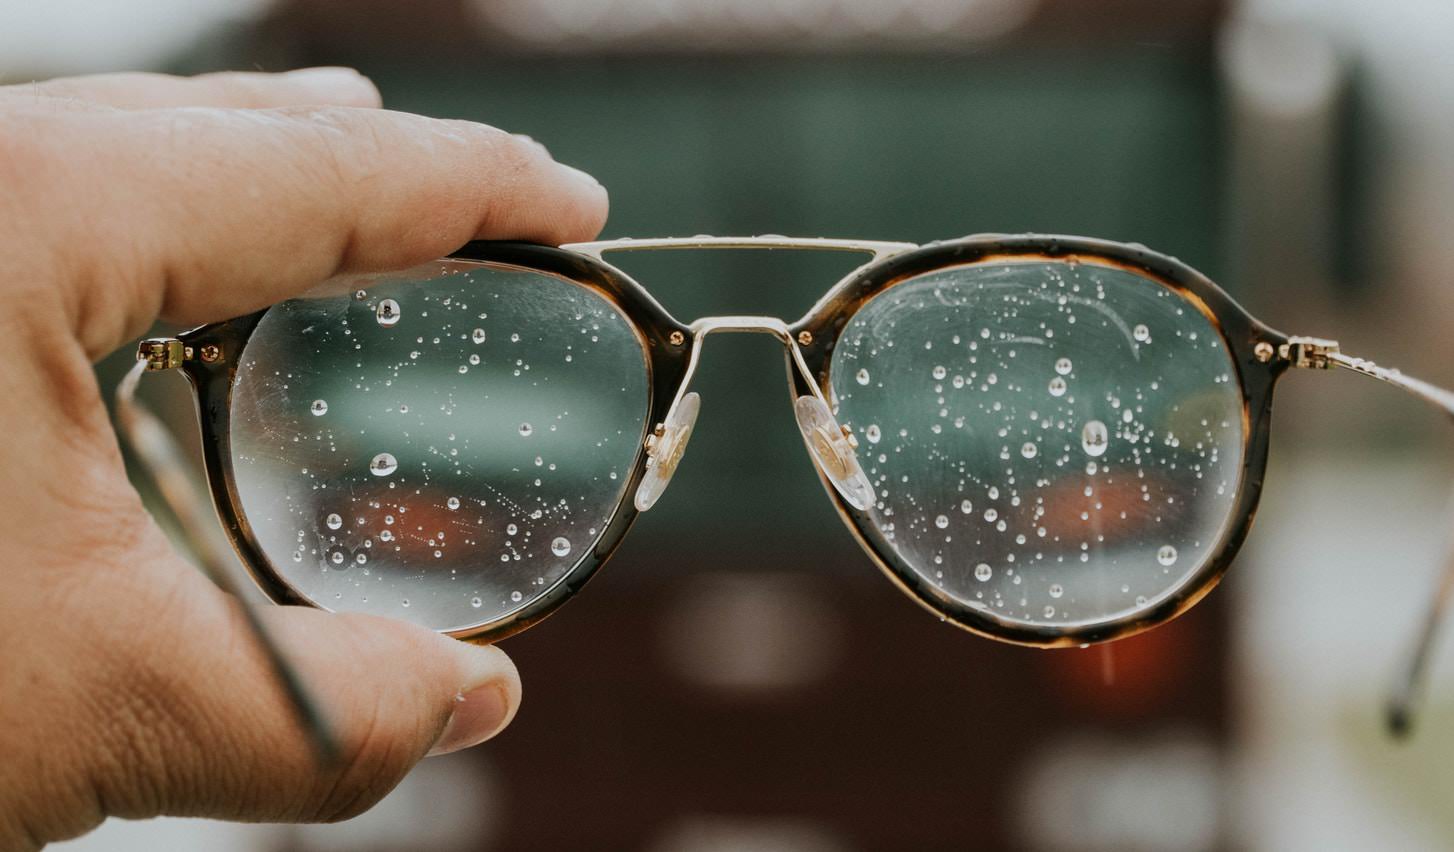 image of a hand holding smeared glasses covered in rain drops